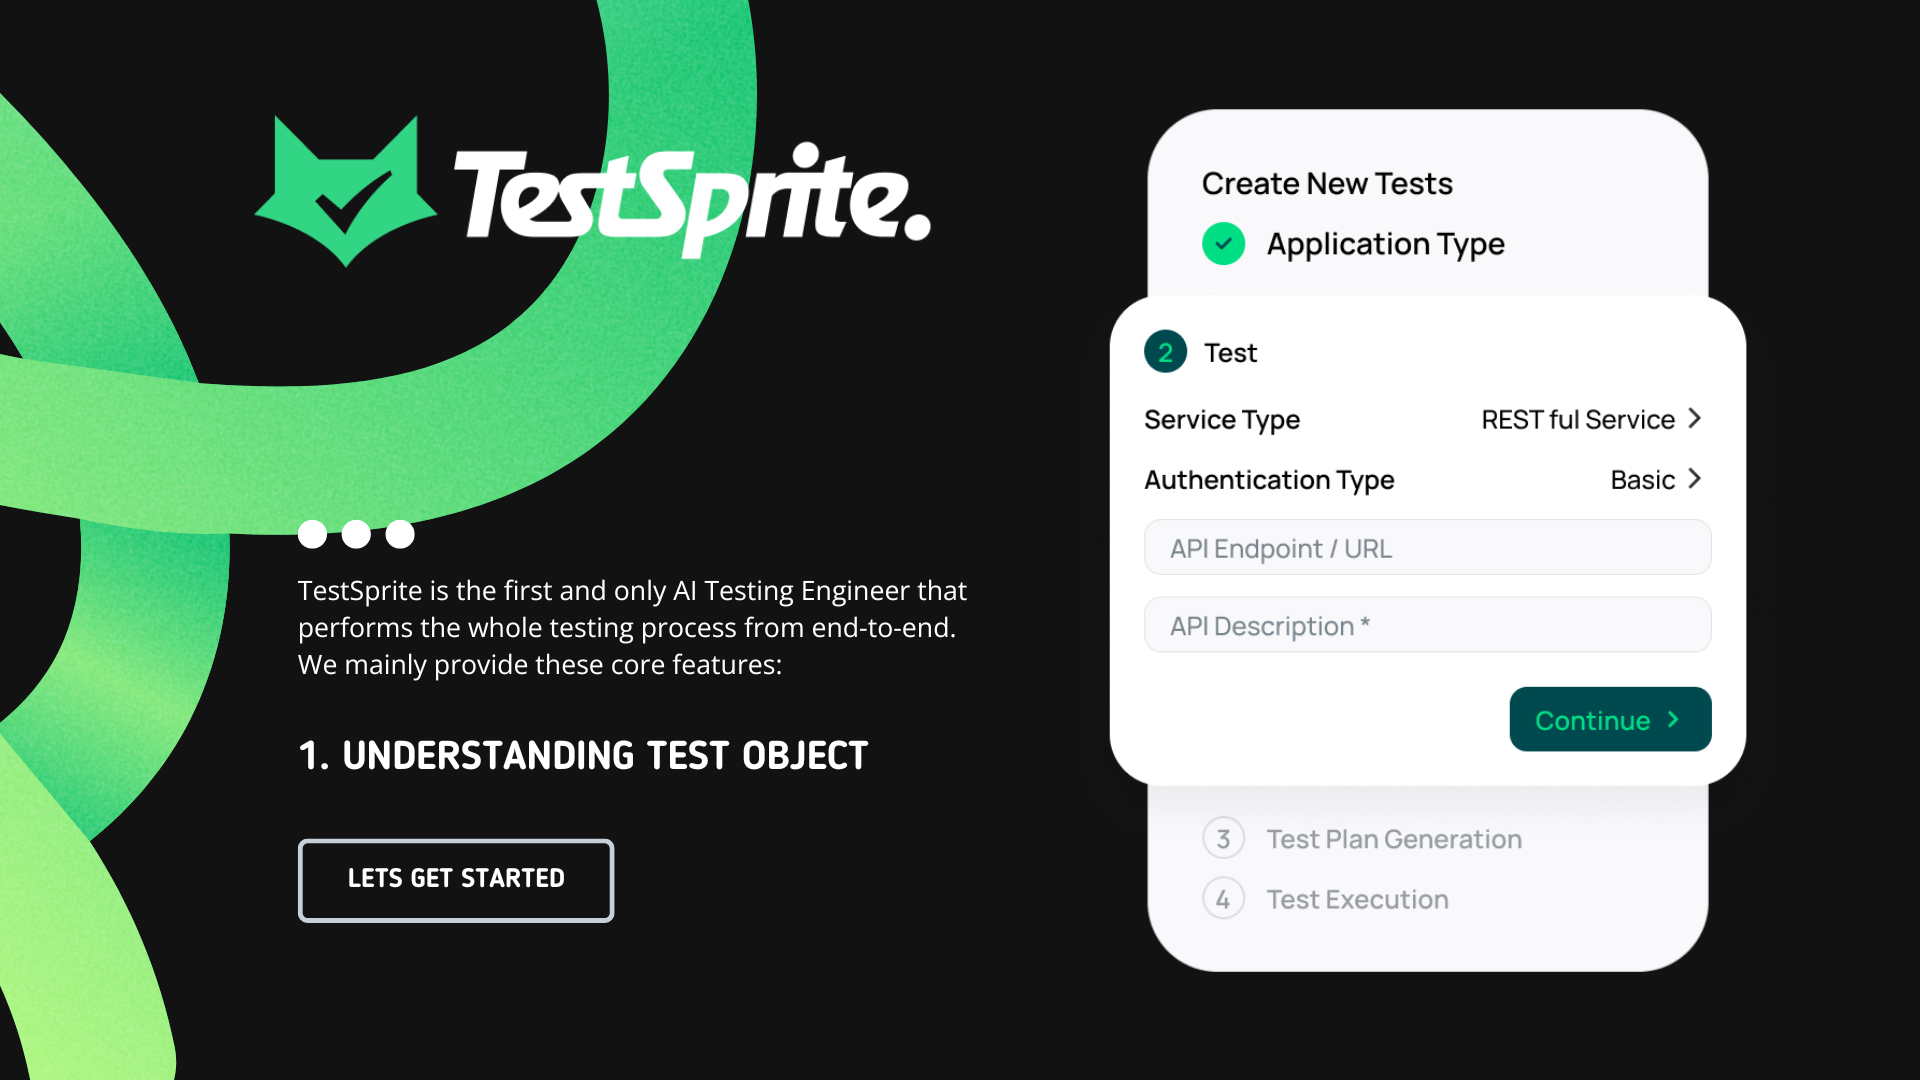 startuptile TestSprite Beta -Fully automate software testing end-to-end using AI